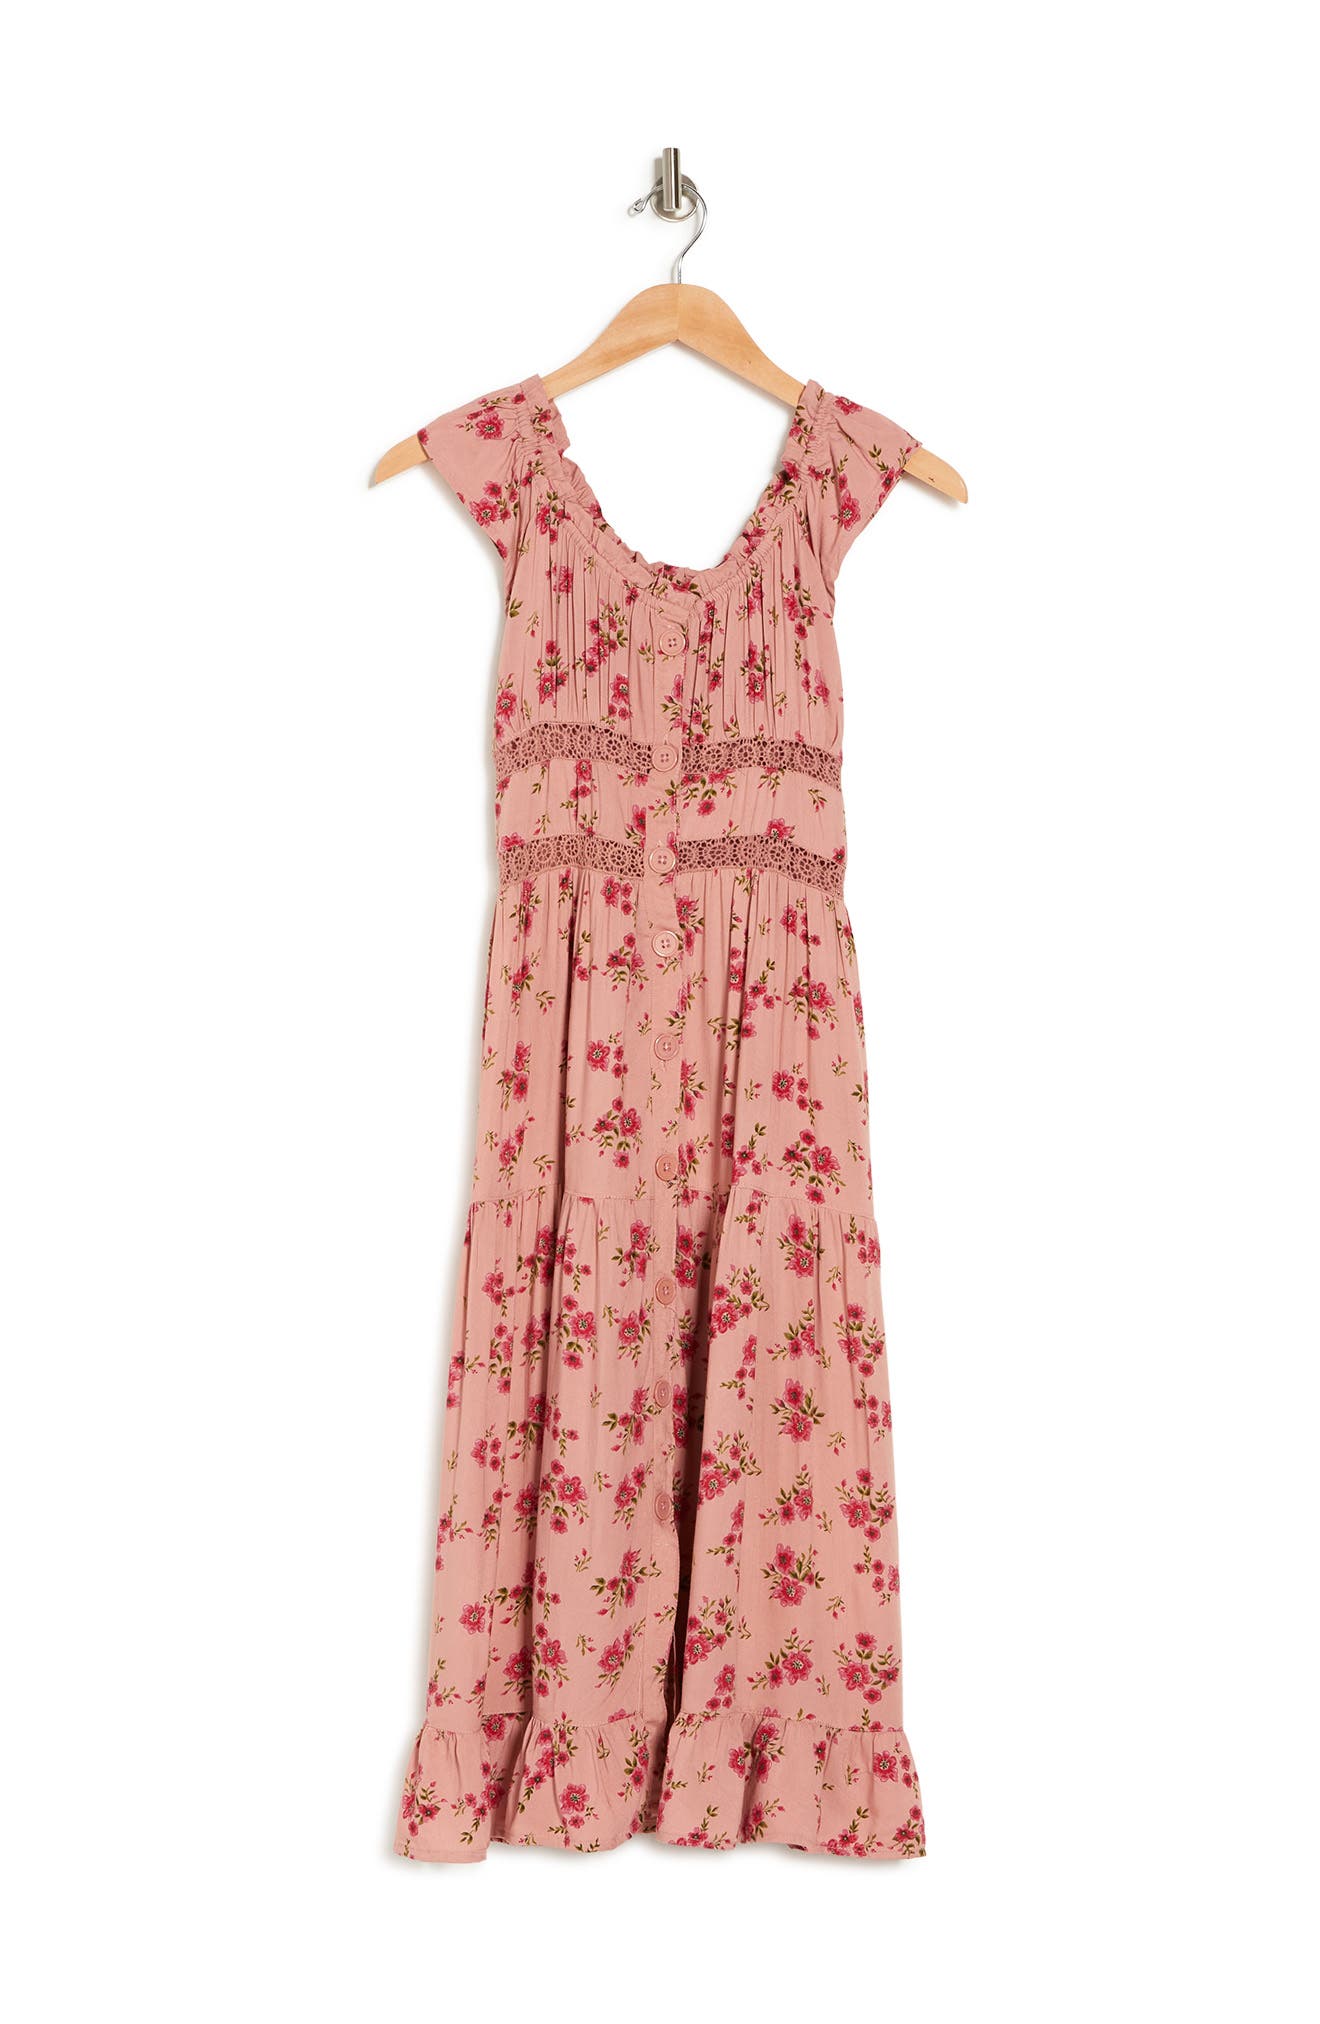 Angie Floral Tiered Crochet Trim Dress In Retro Pink